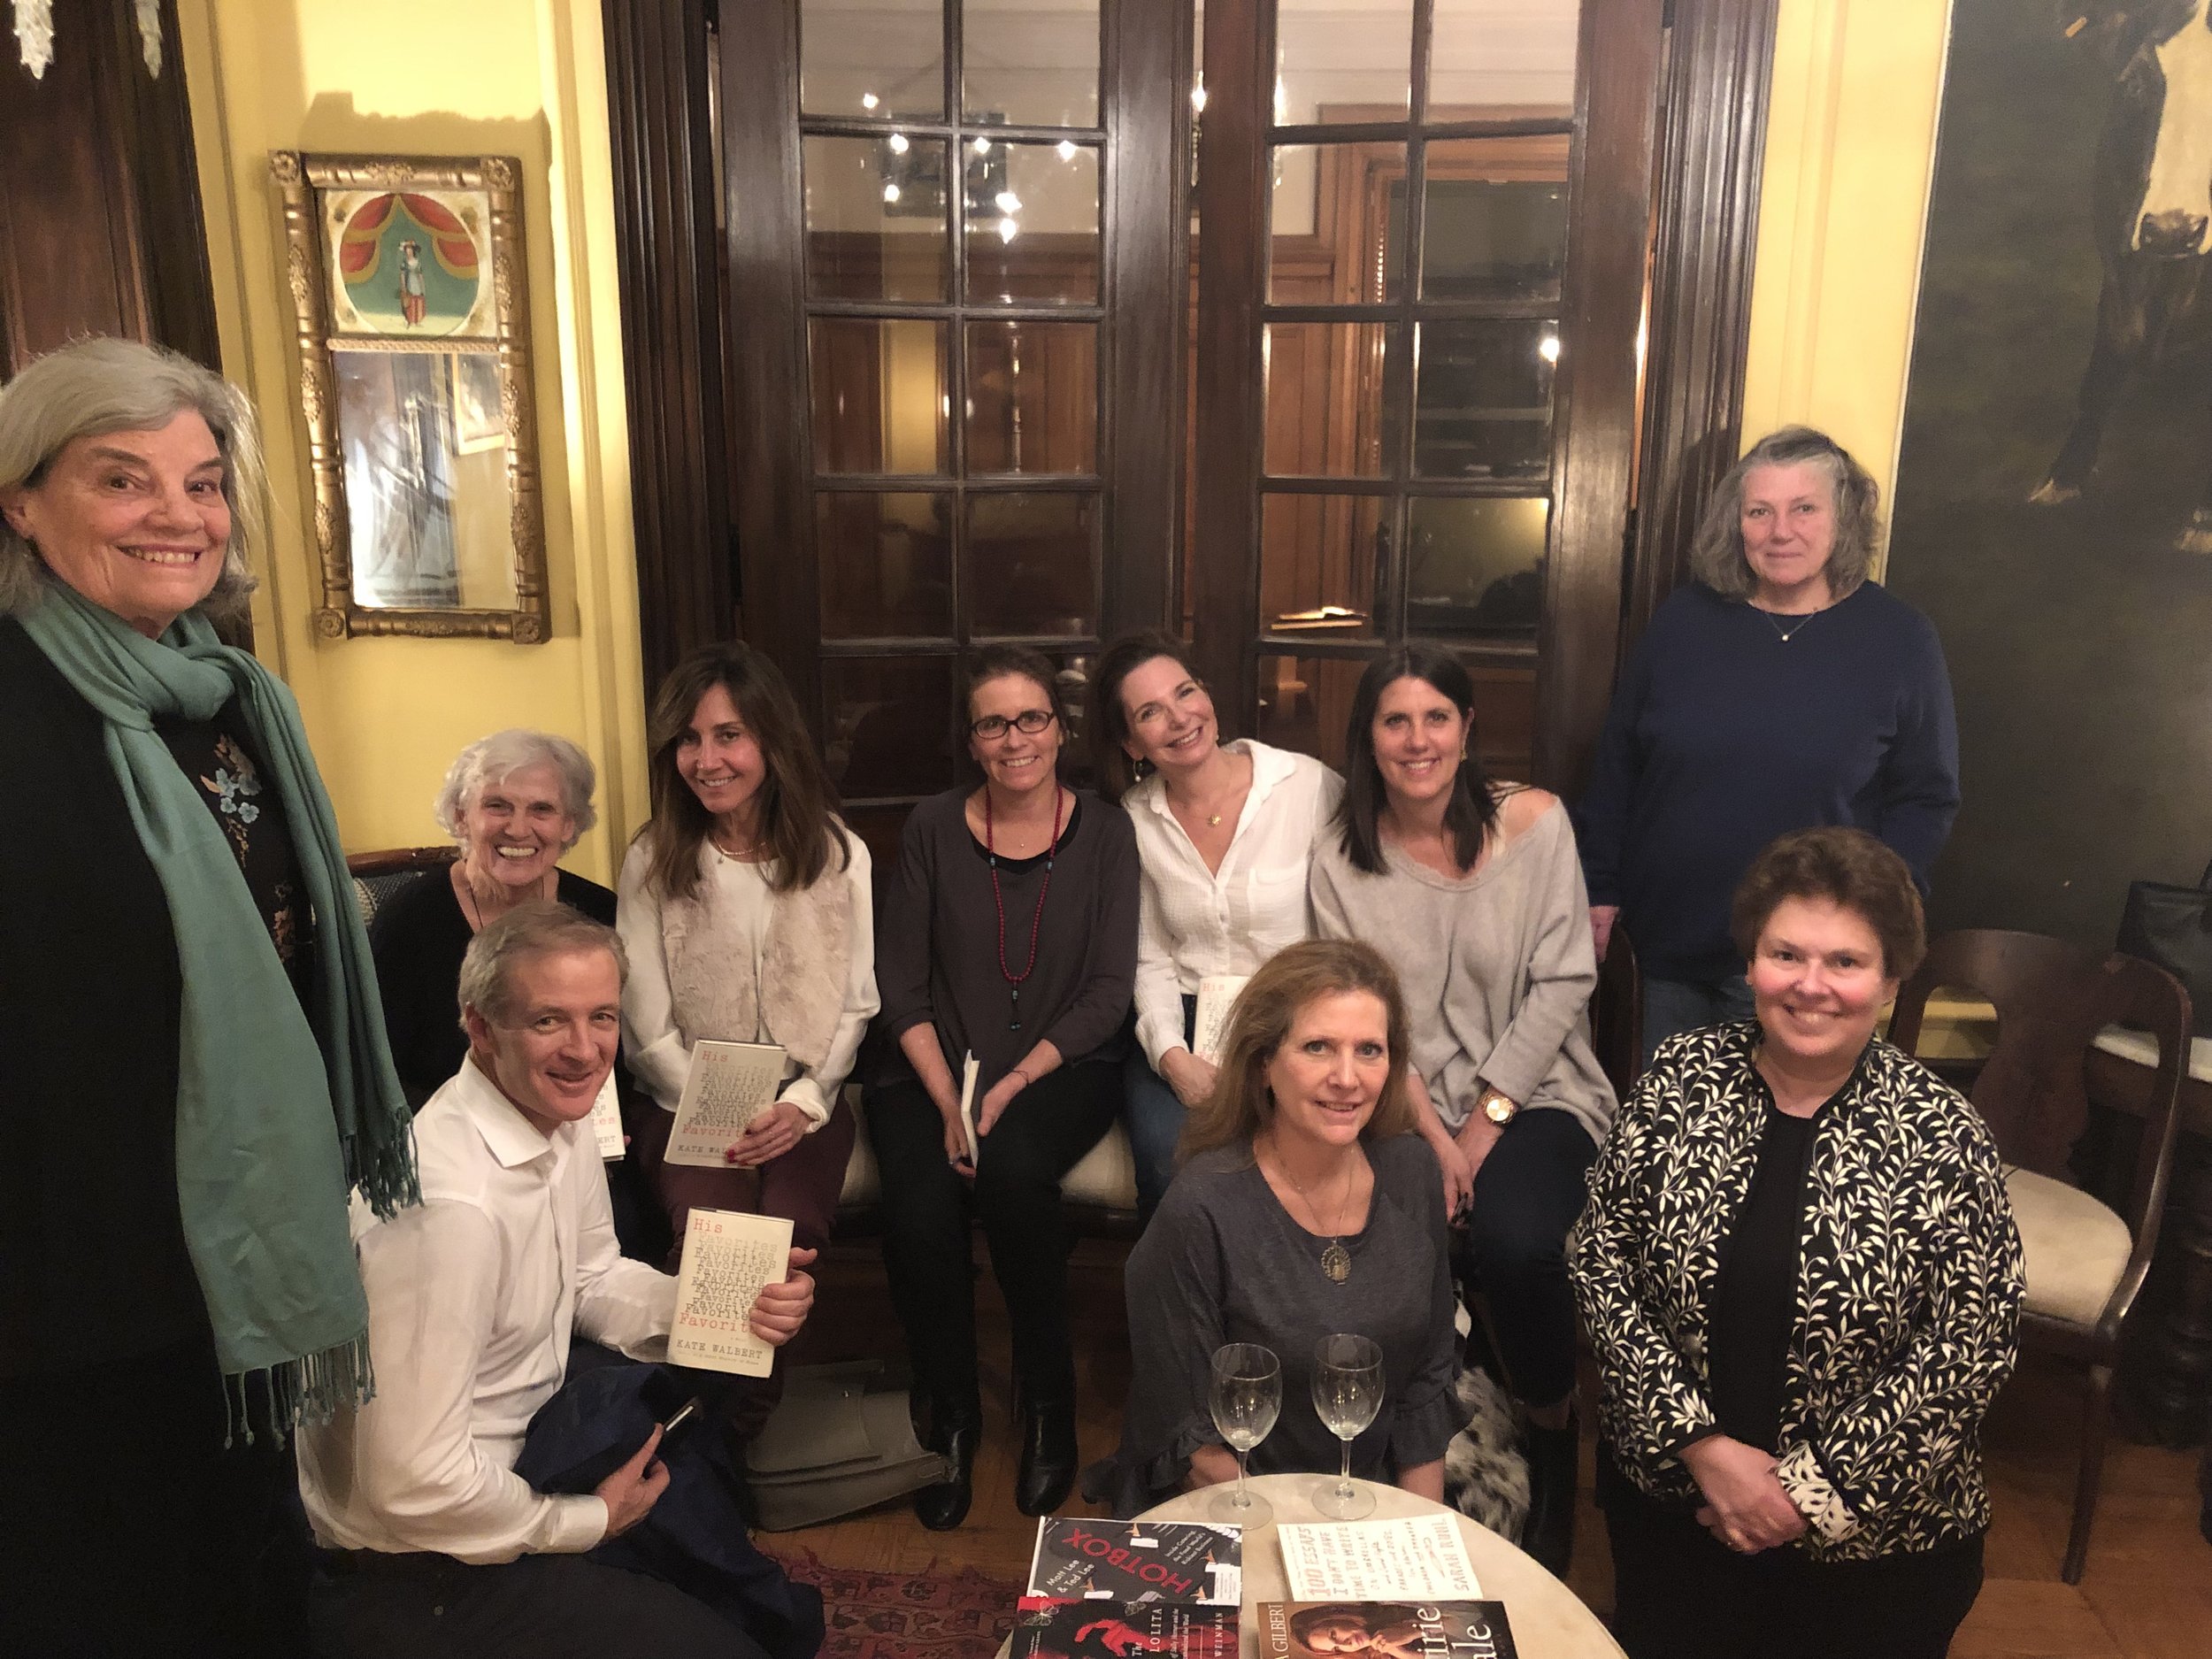 Novelist Kate Walbert at her book group for HIS FAVORITES